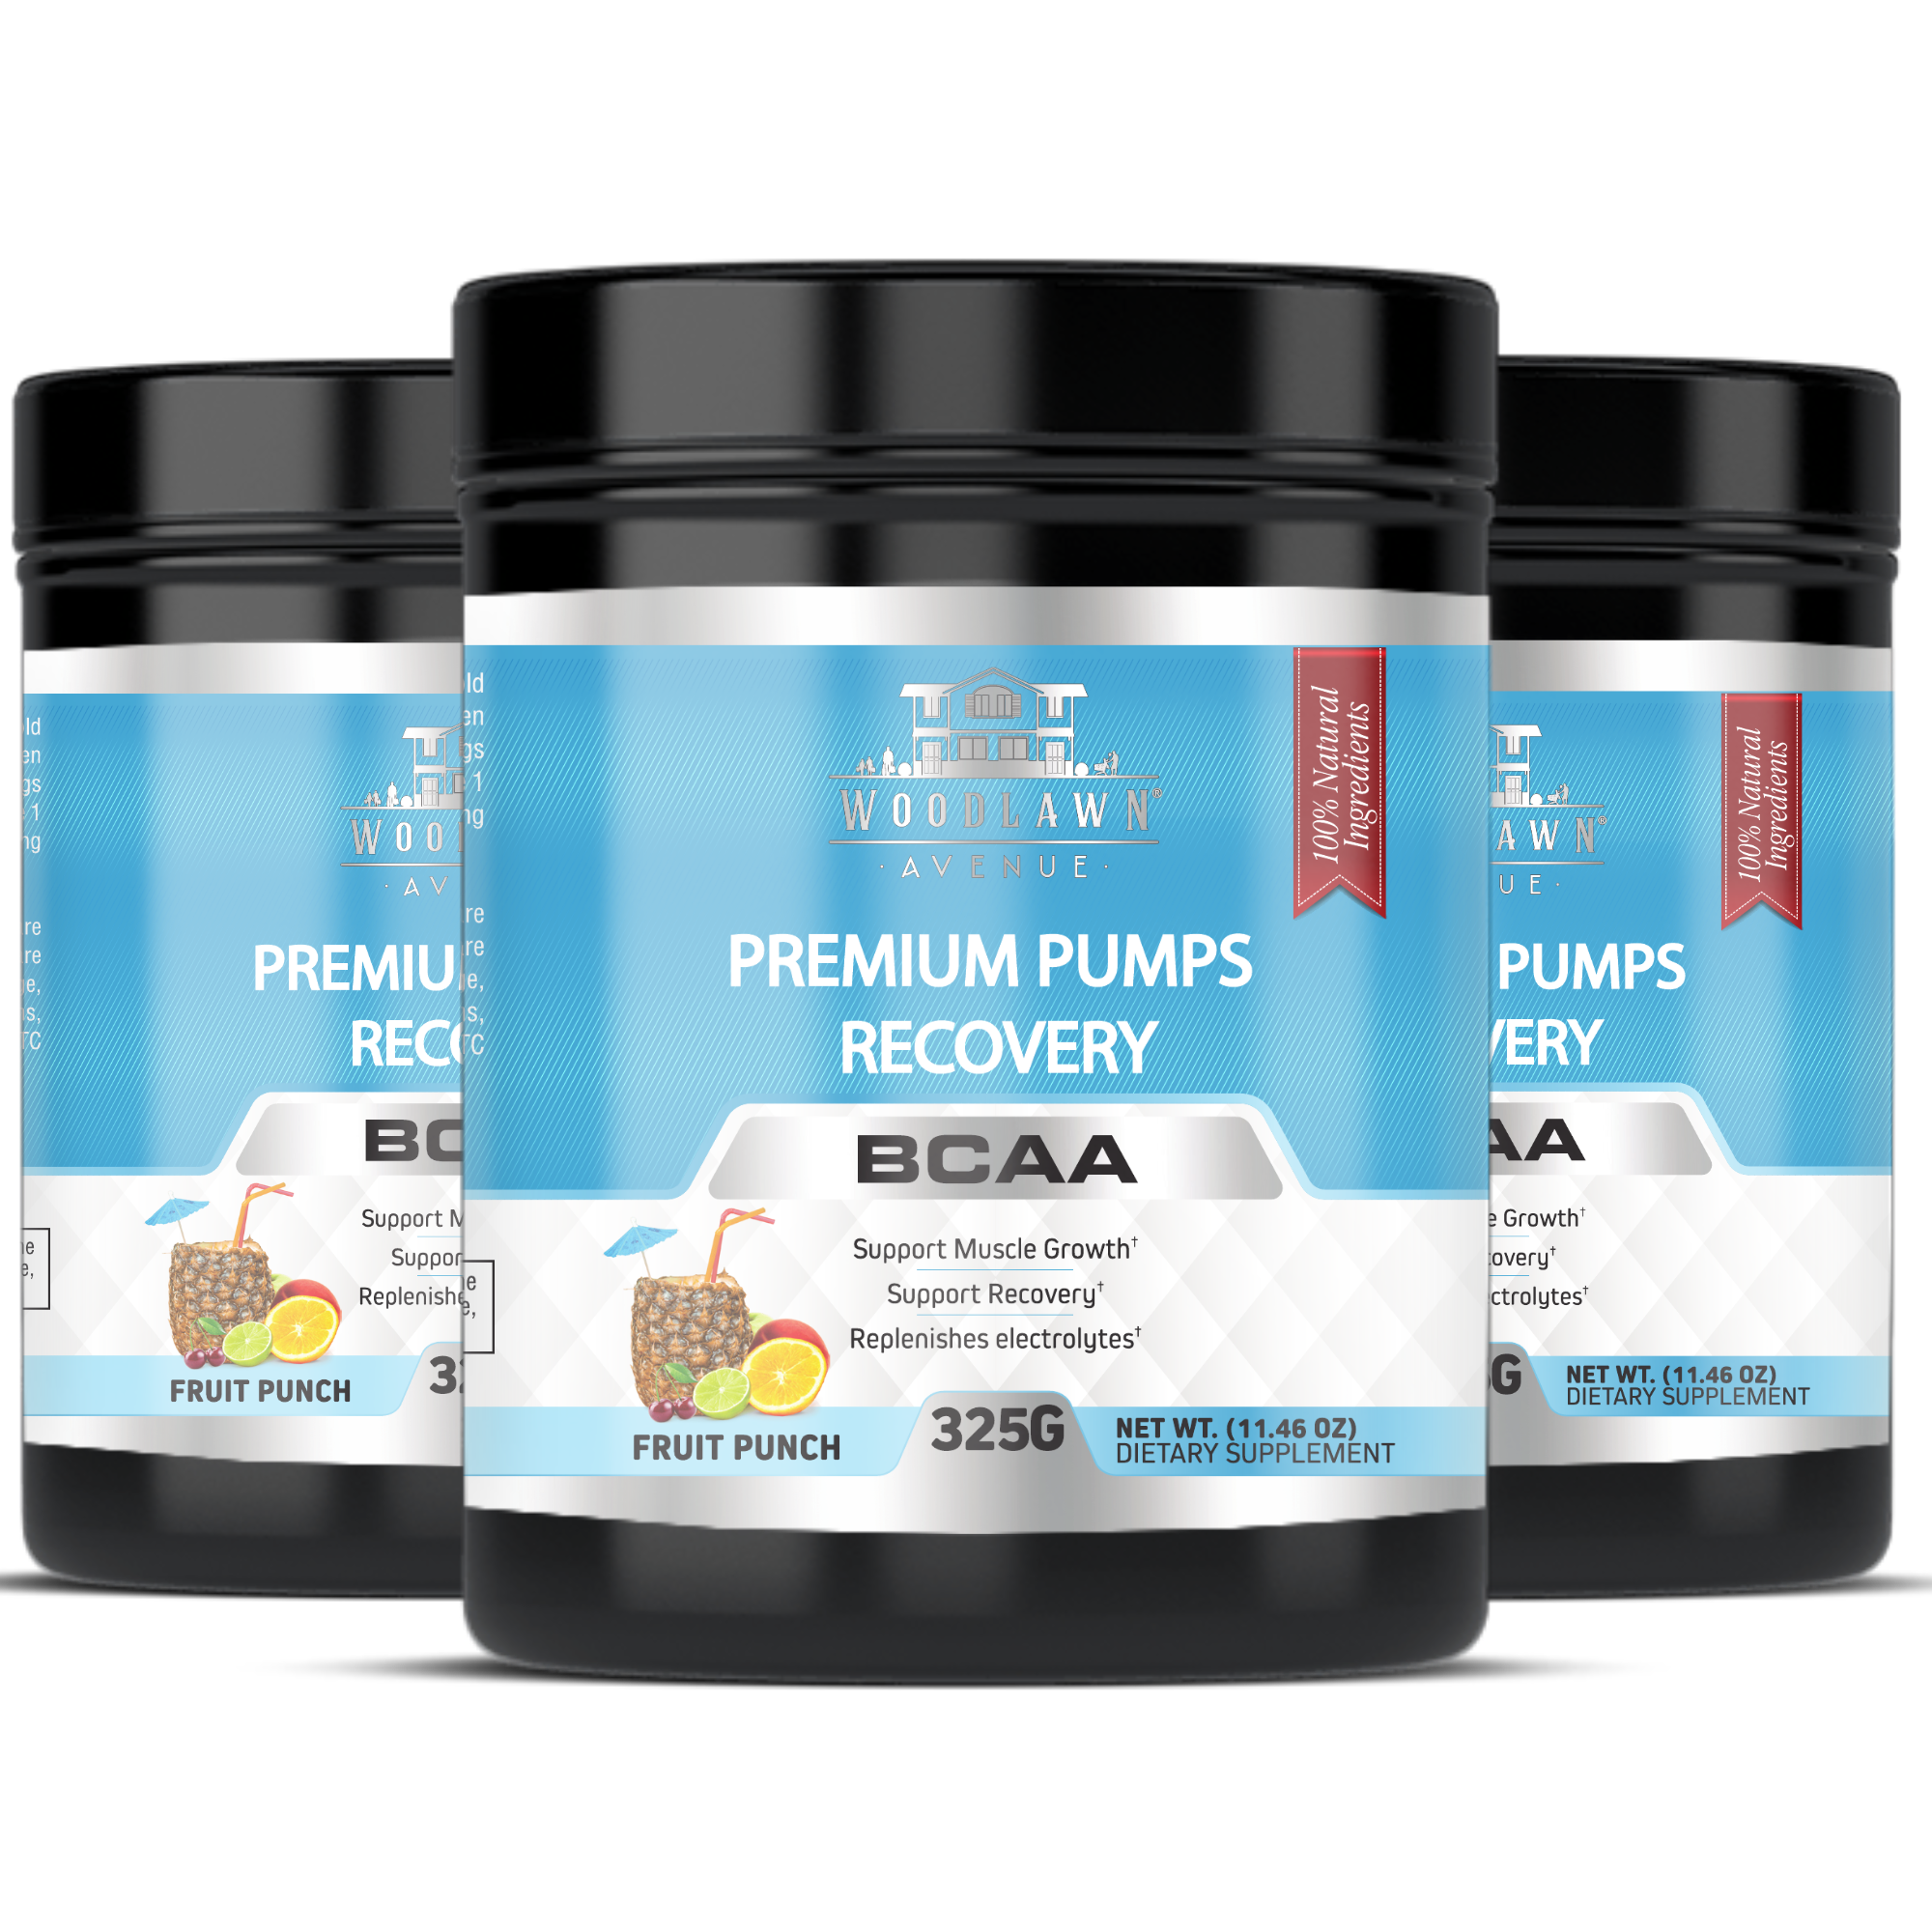 Premium Pumps Recovery - BCAA Fruit Punch Flavor Muscle Recovery Supplement